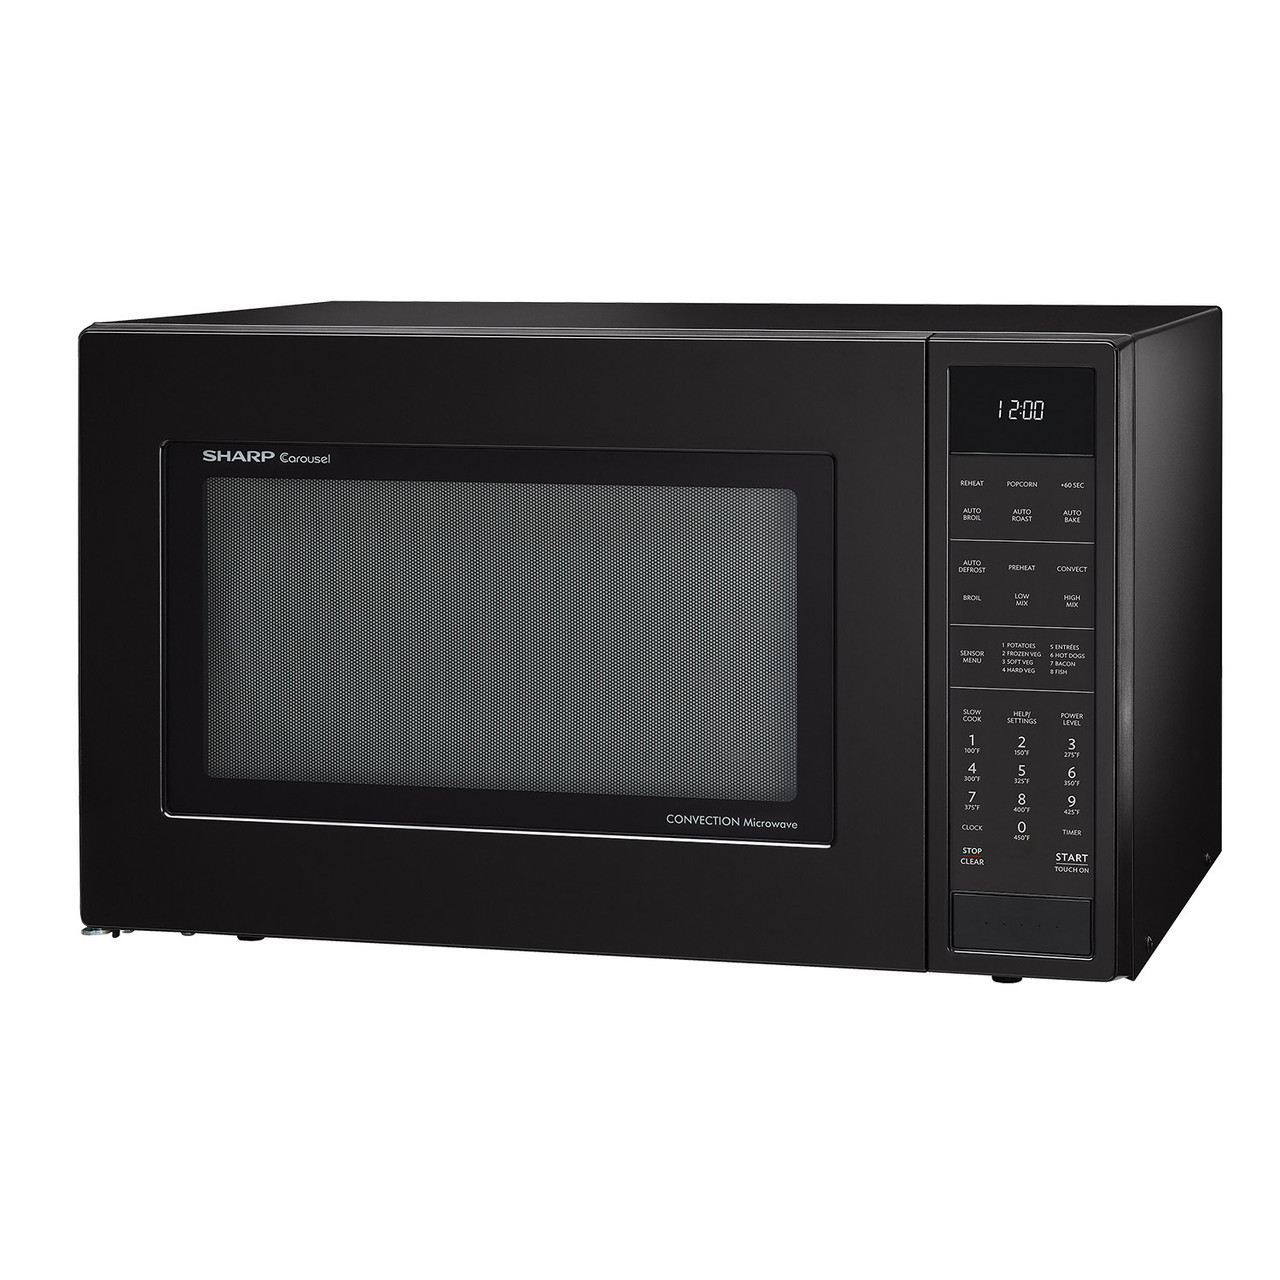 1.5 cu. ft. Sharp Black Carousel Convection Microwave (SMC1585BB) – left angle view